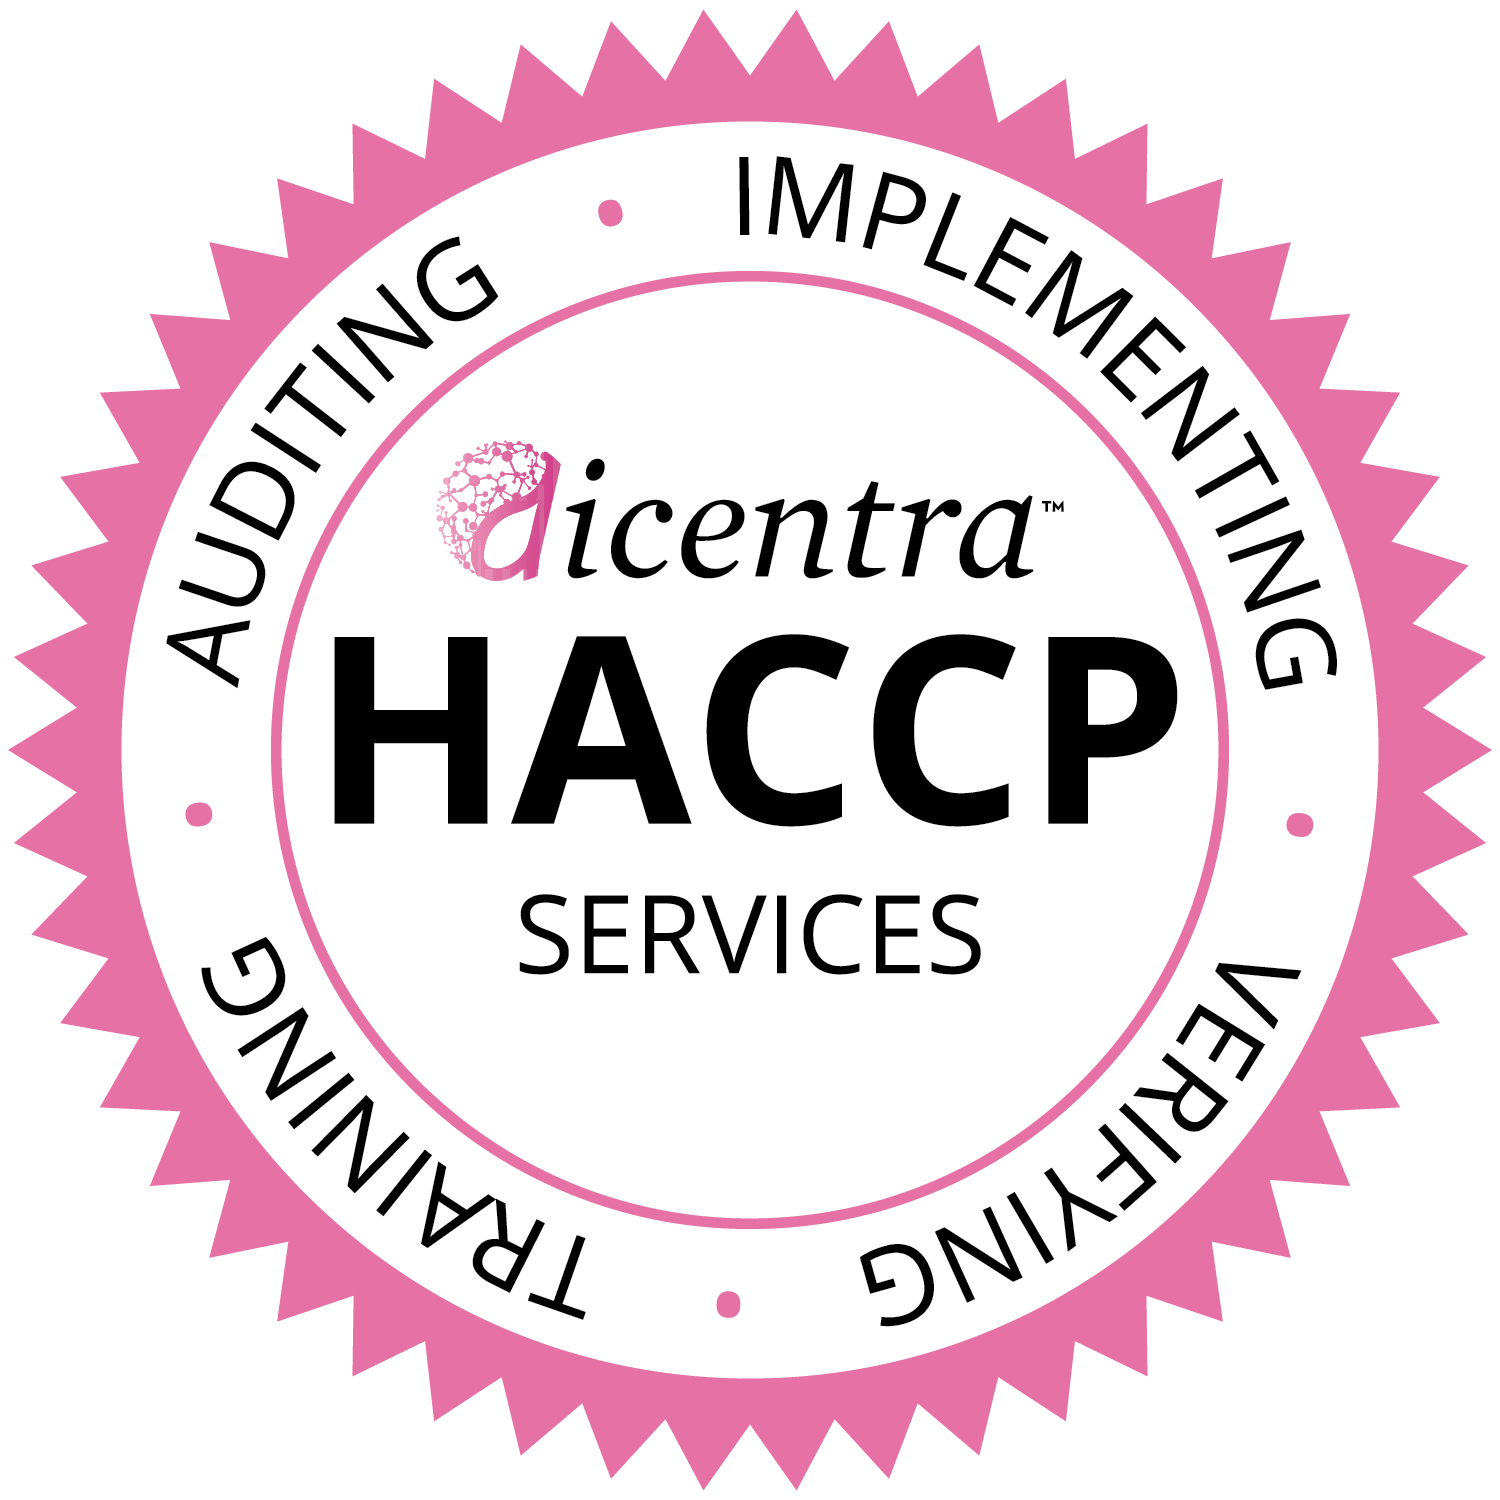 HACCP Certifications Plans dicentra